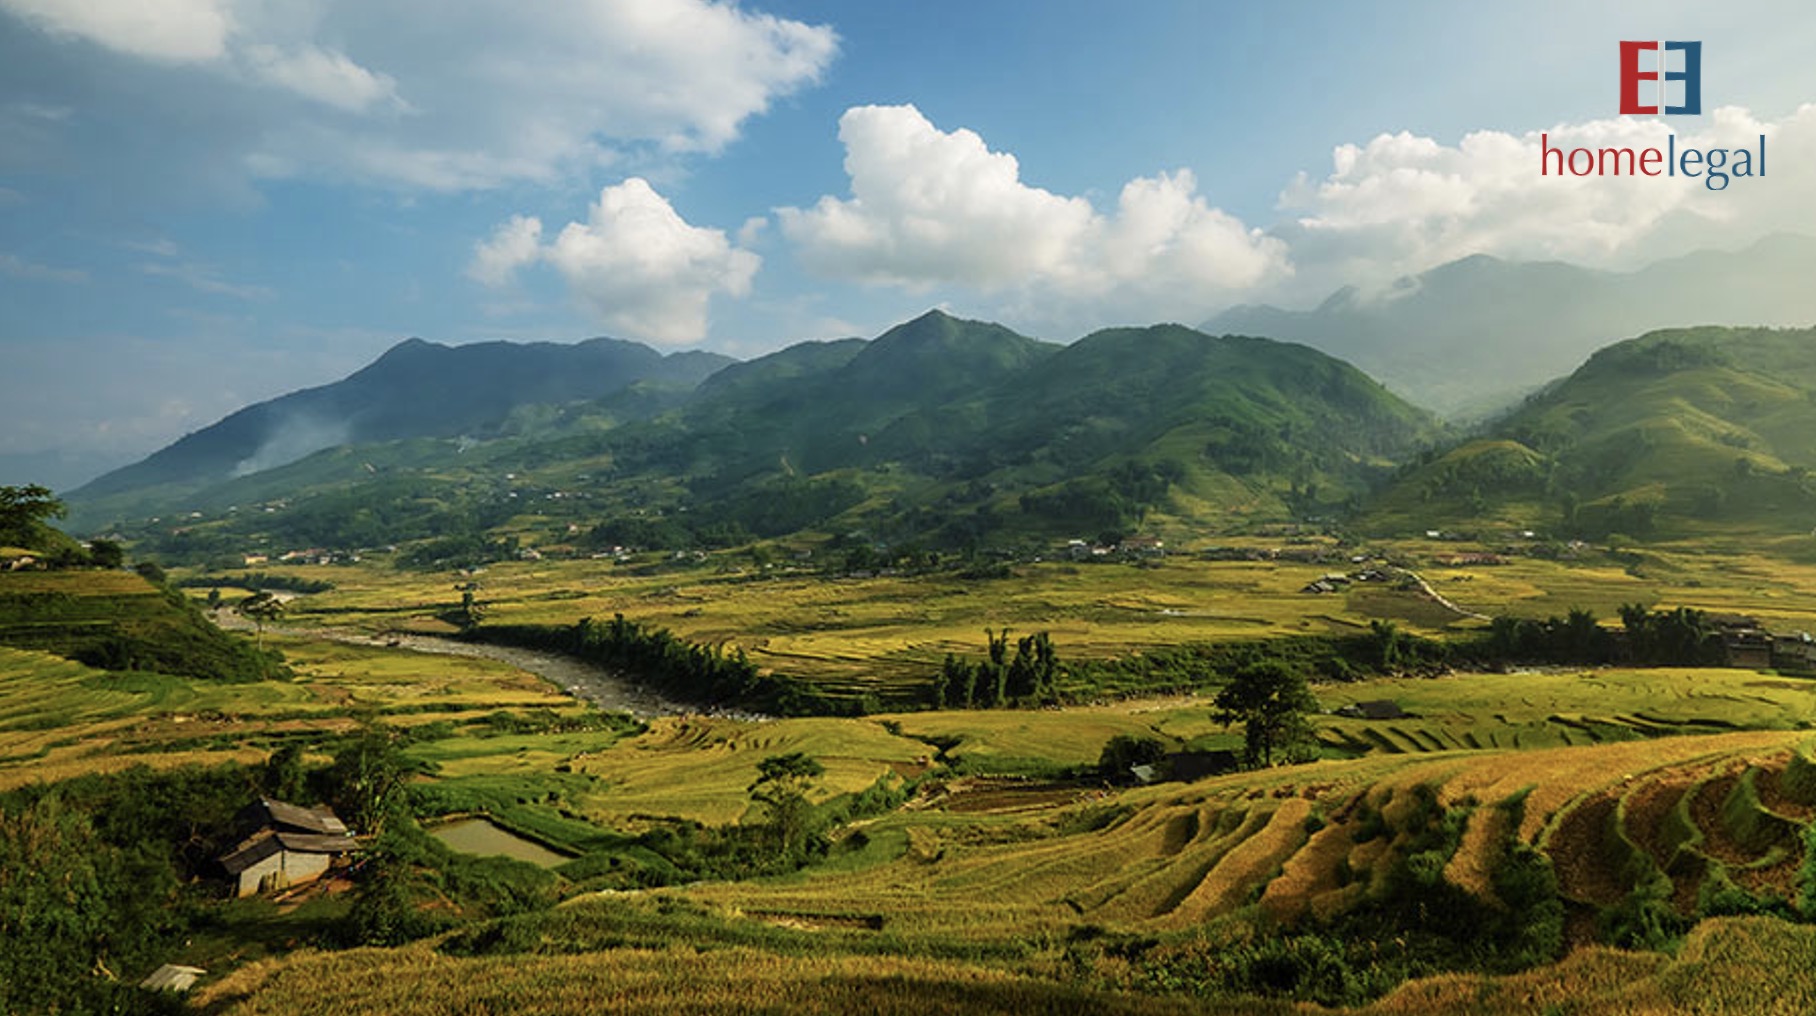 Arbitration as an Option for Land-Related Commercial Disputes: Insights on the Latest Draft Land Law in Vietnam.